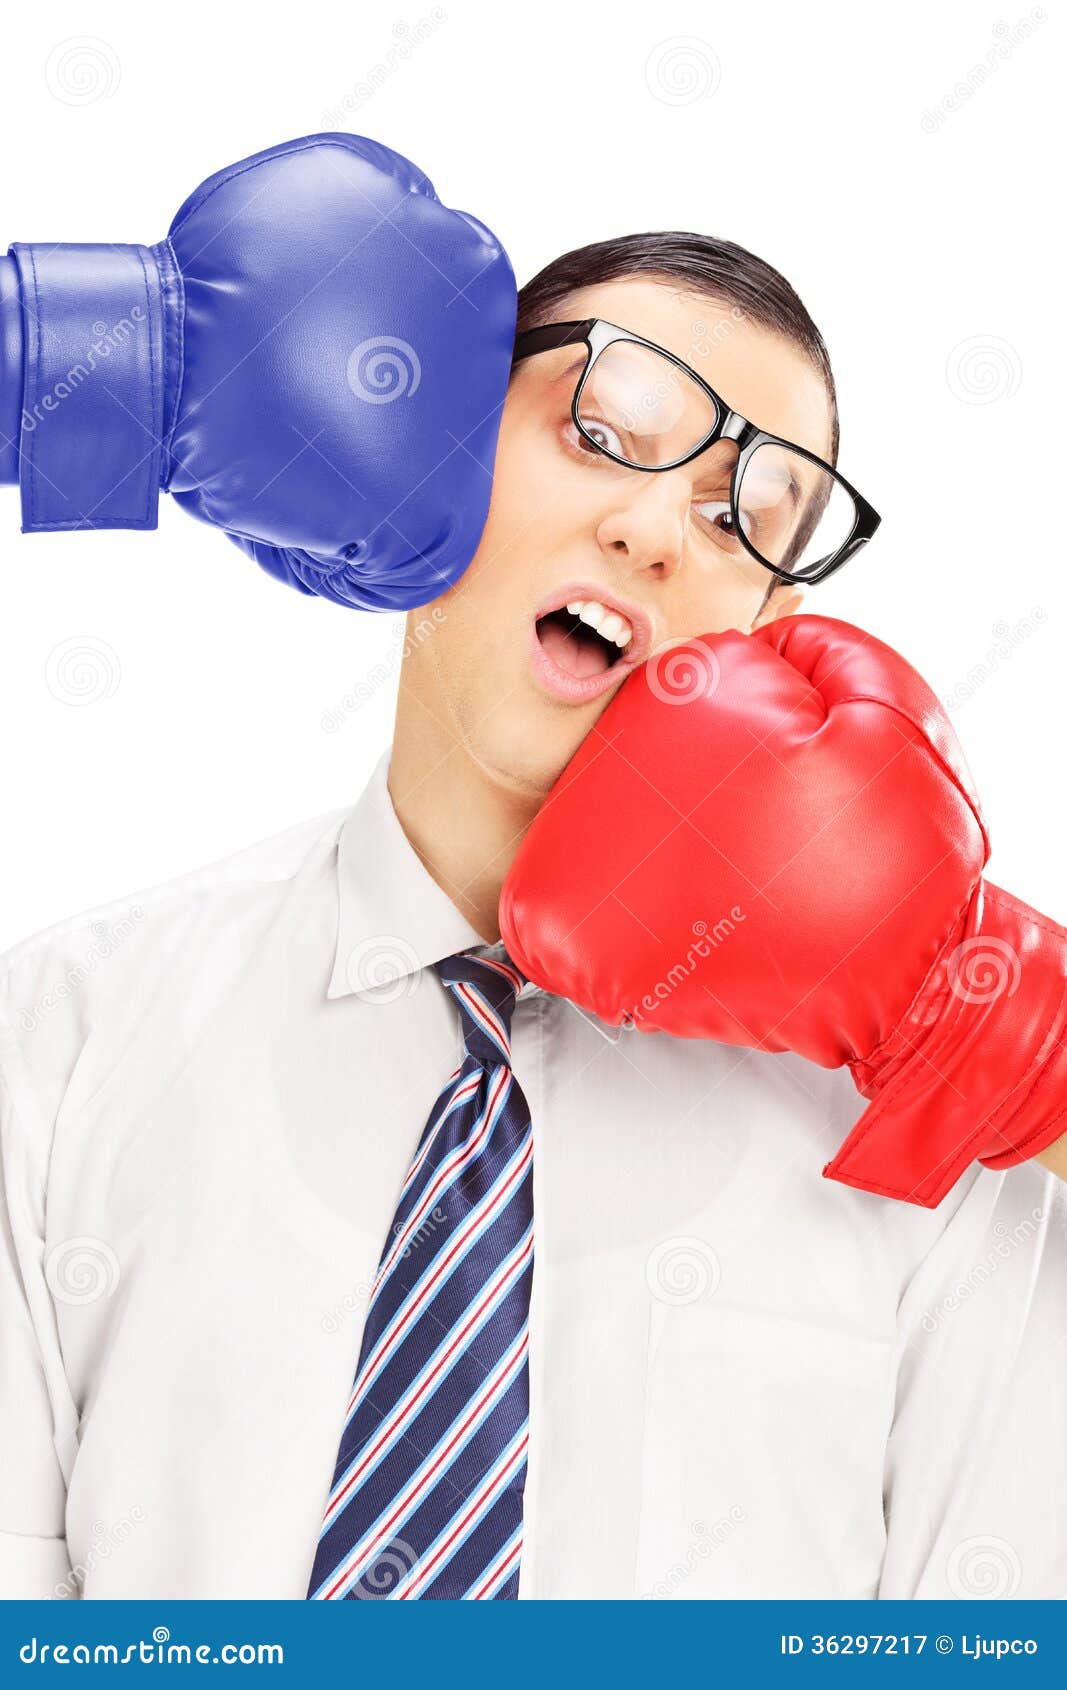 young-man-glasses-punched-two-boxing-gloves-isolated-white-background-36297217.jpg